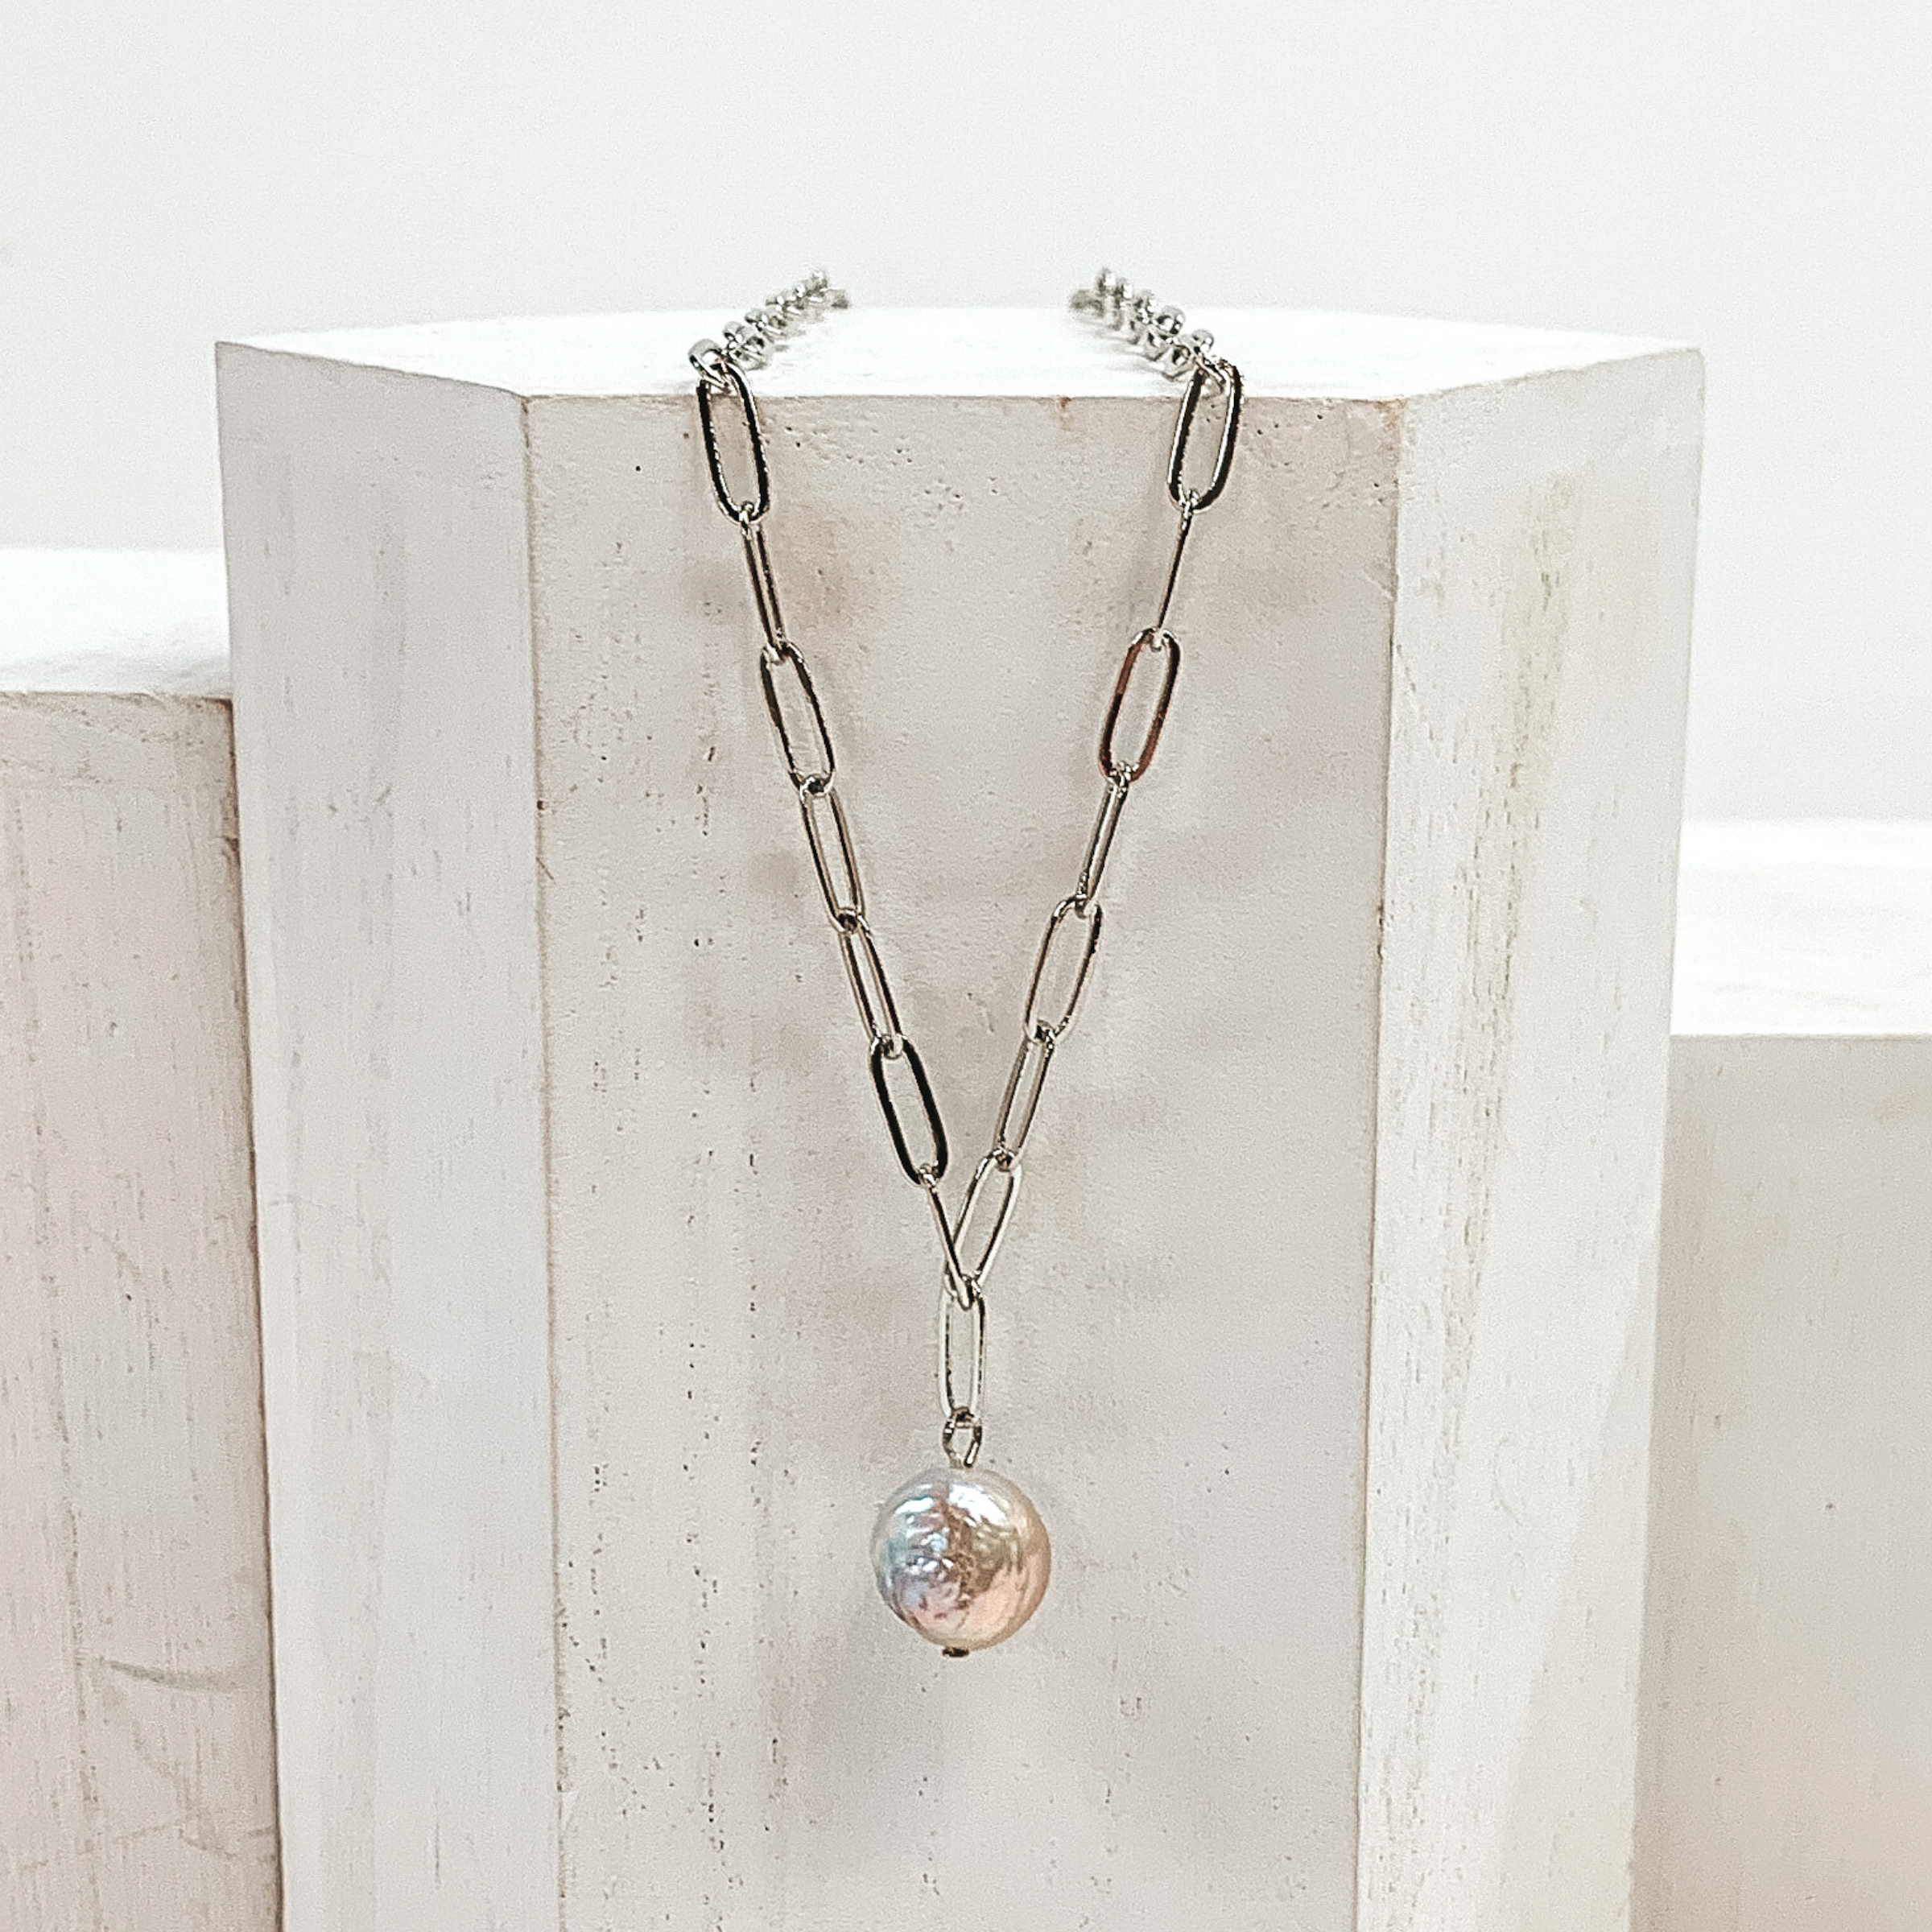 This is a silver paperclip chained necklace with a irregularly shaped pearl drop pendant. This necklace is pictured laying on a white block on a white background.